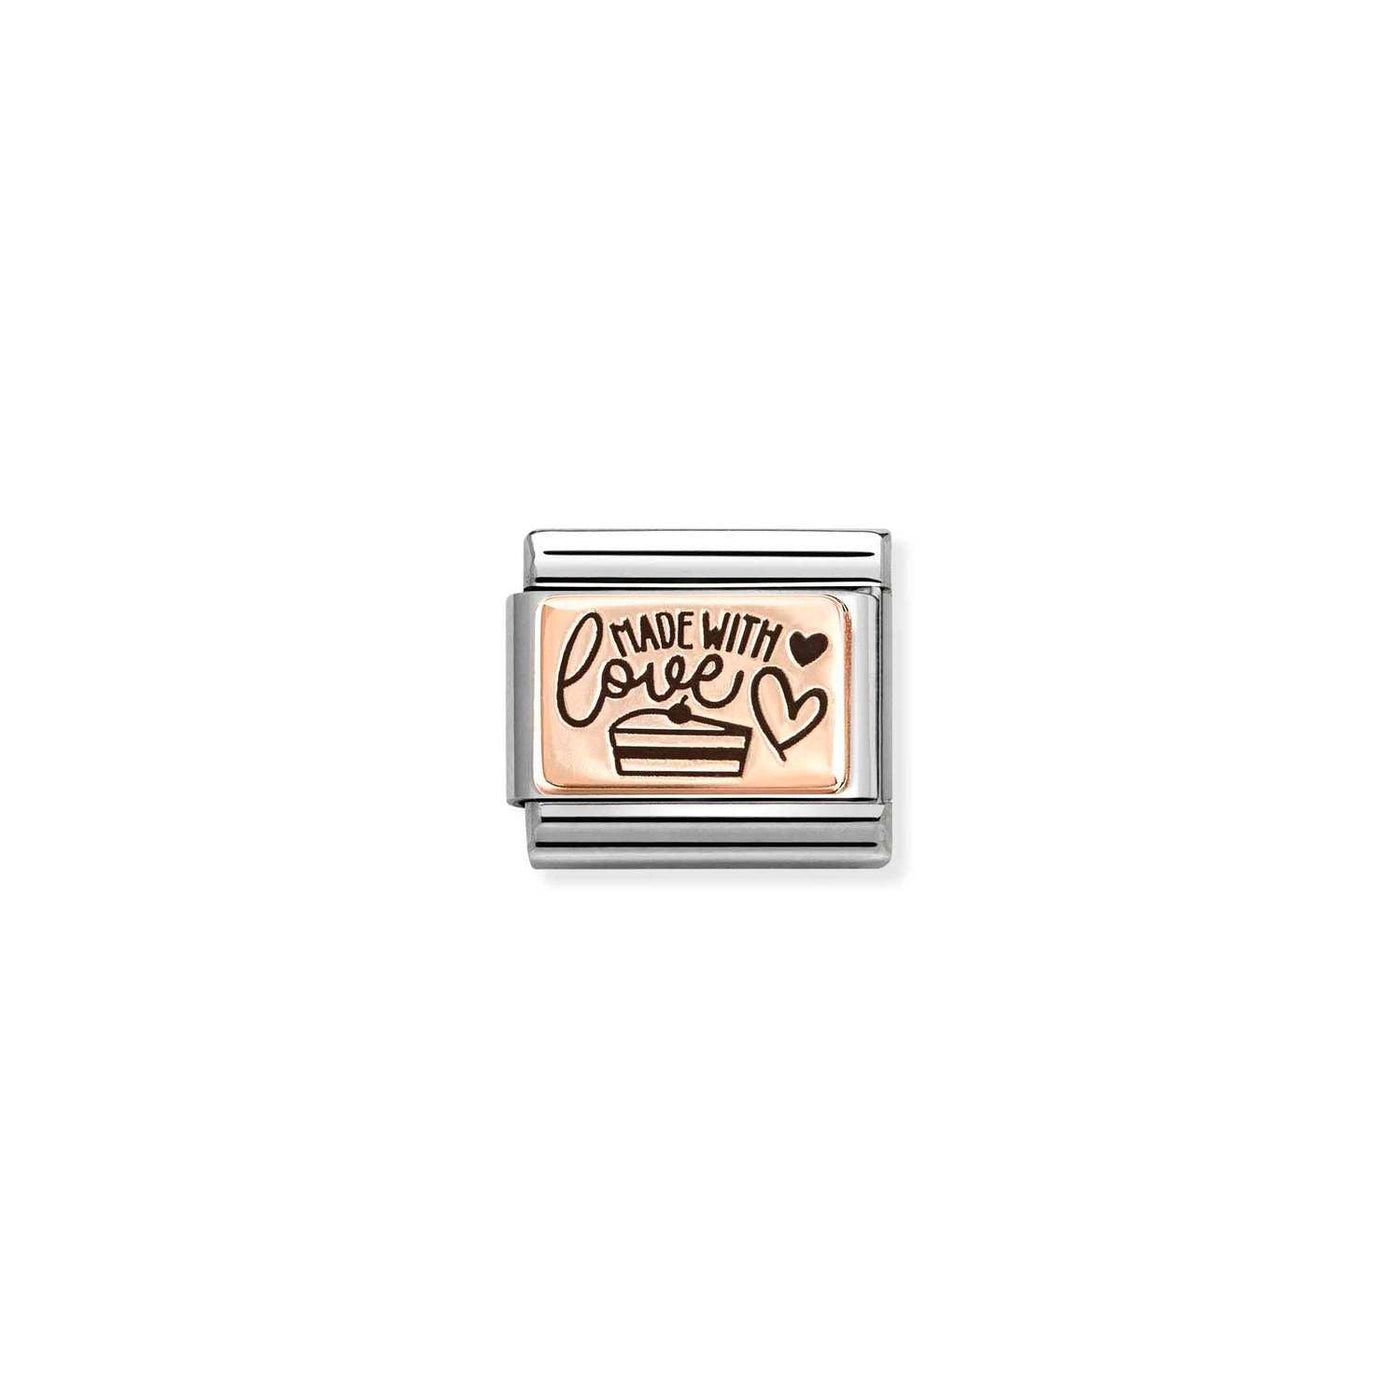 Nomination Rose Gold 'Made with Love' Cake Charm